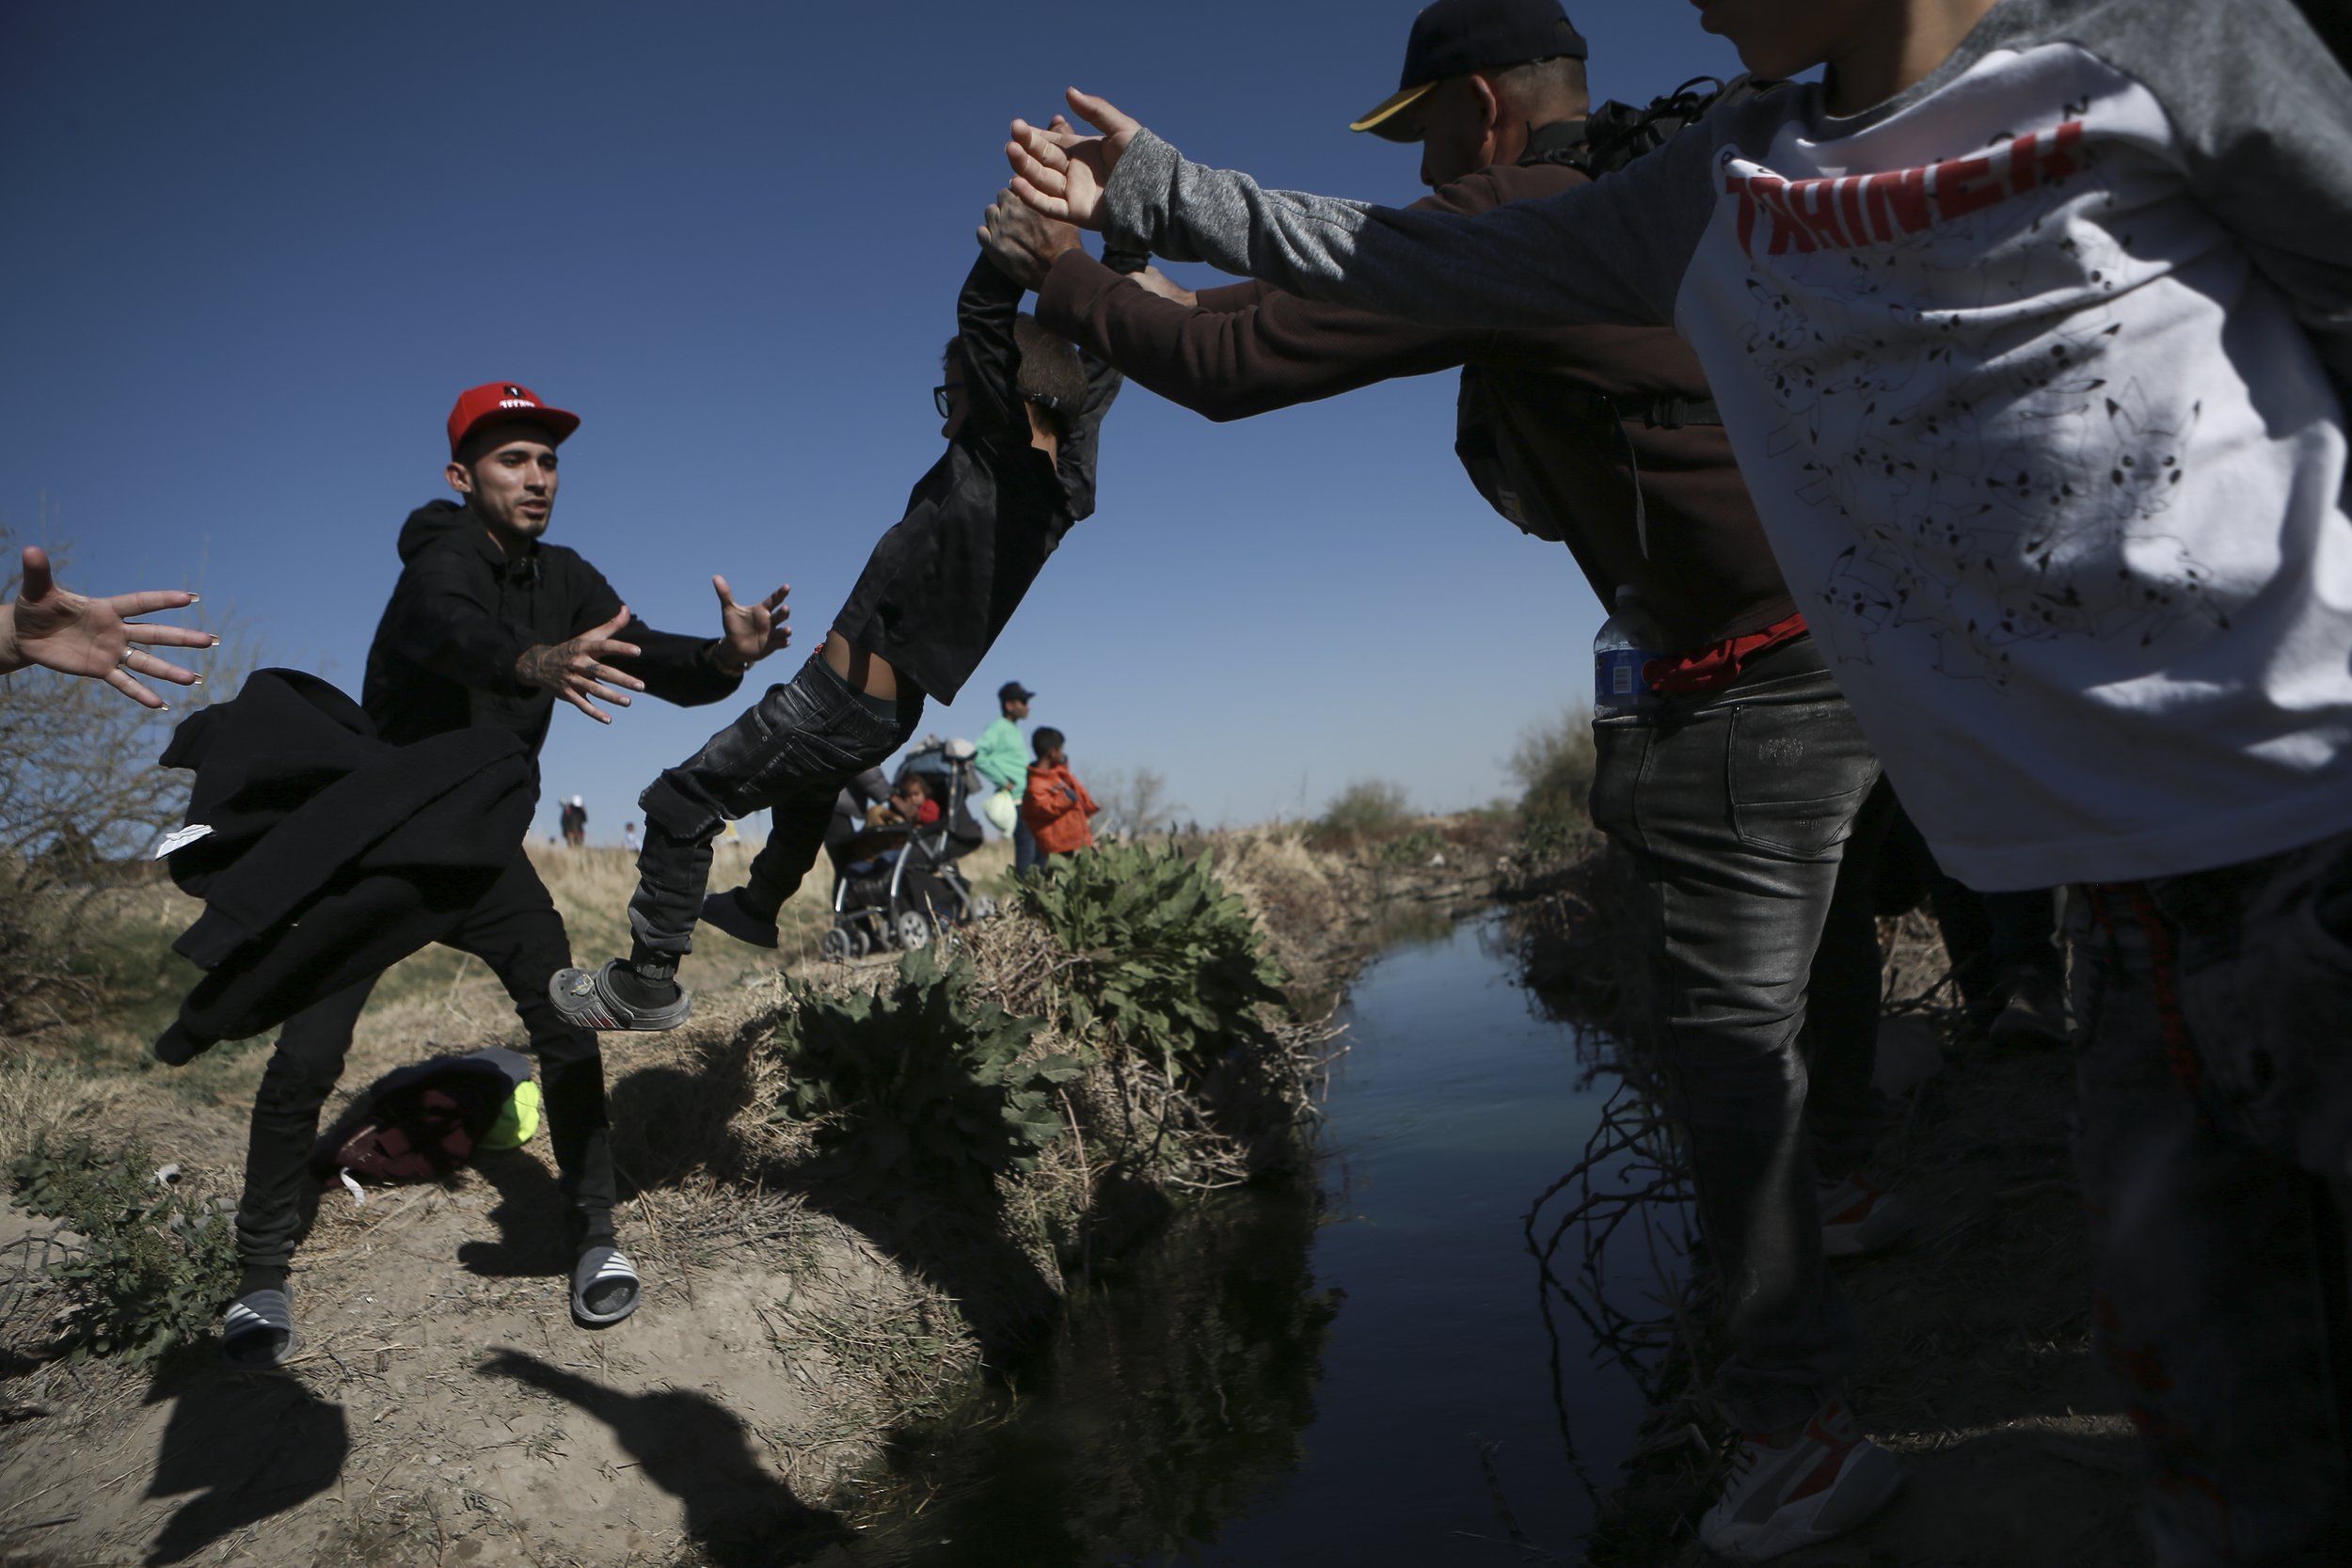  Migrants cross the Rio Grande into the United States from Ciudad Juarez, Mexico, on March 29, 2023, a day after dozens of migrants died in a fire at a migrant detention center in Ciudad Juarez. (AP Photo/Christian Chavez) 